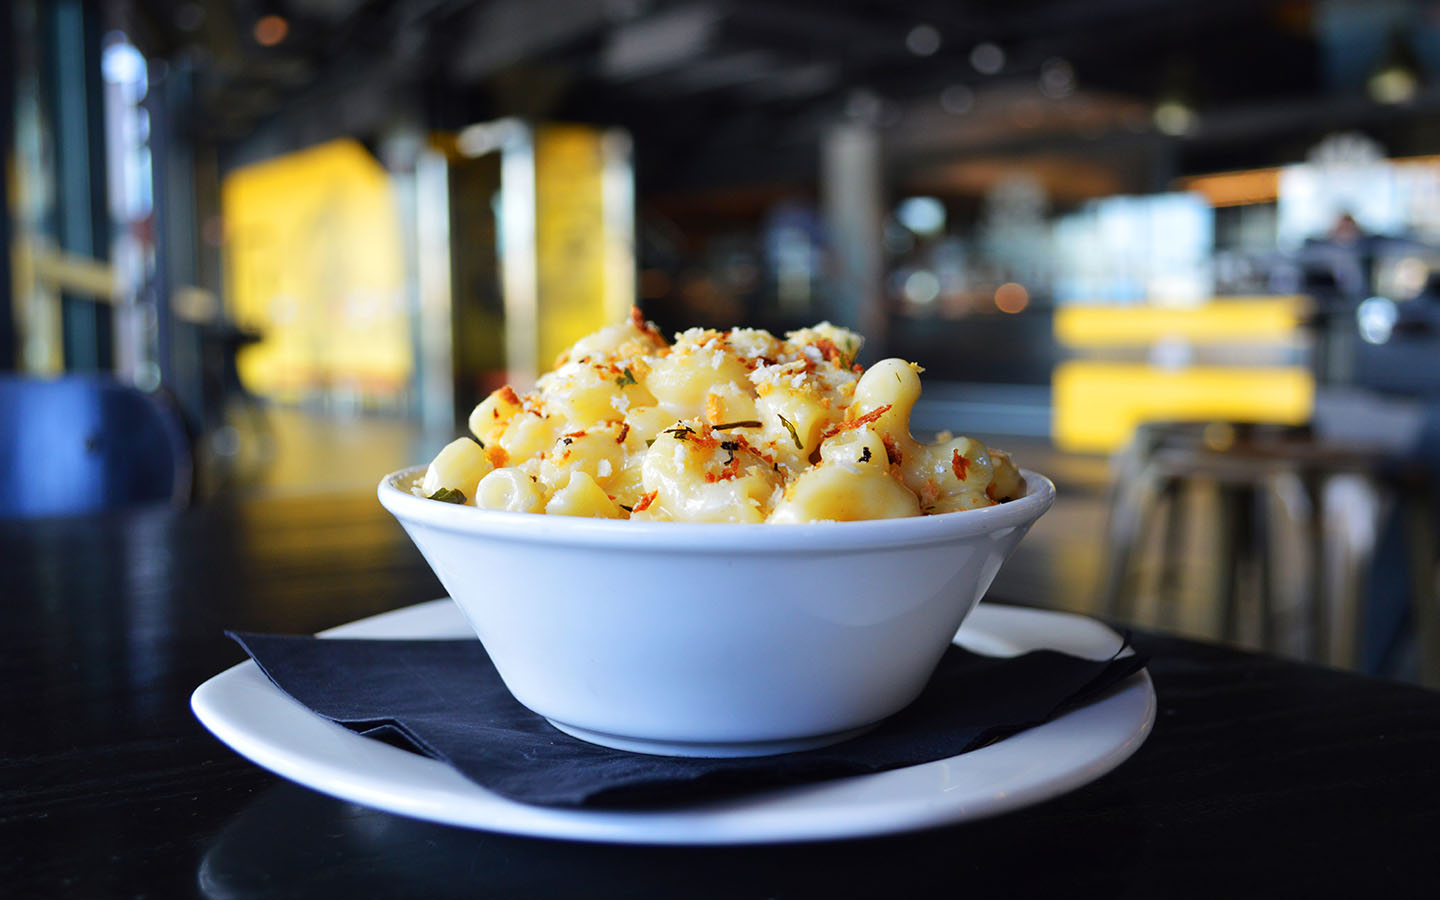 Mac & Cheese at NBC Sports Grill & Brew in Universal CityWalk